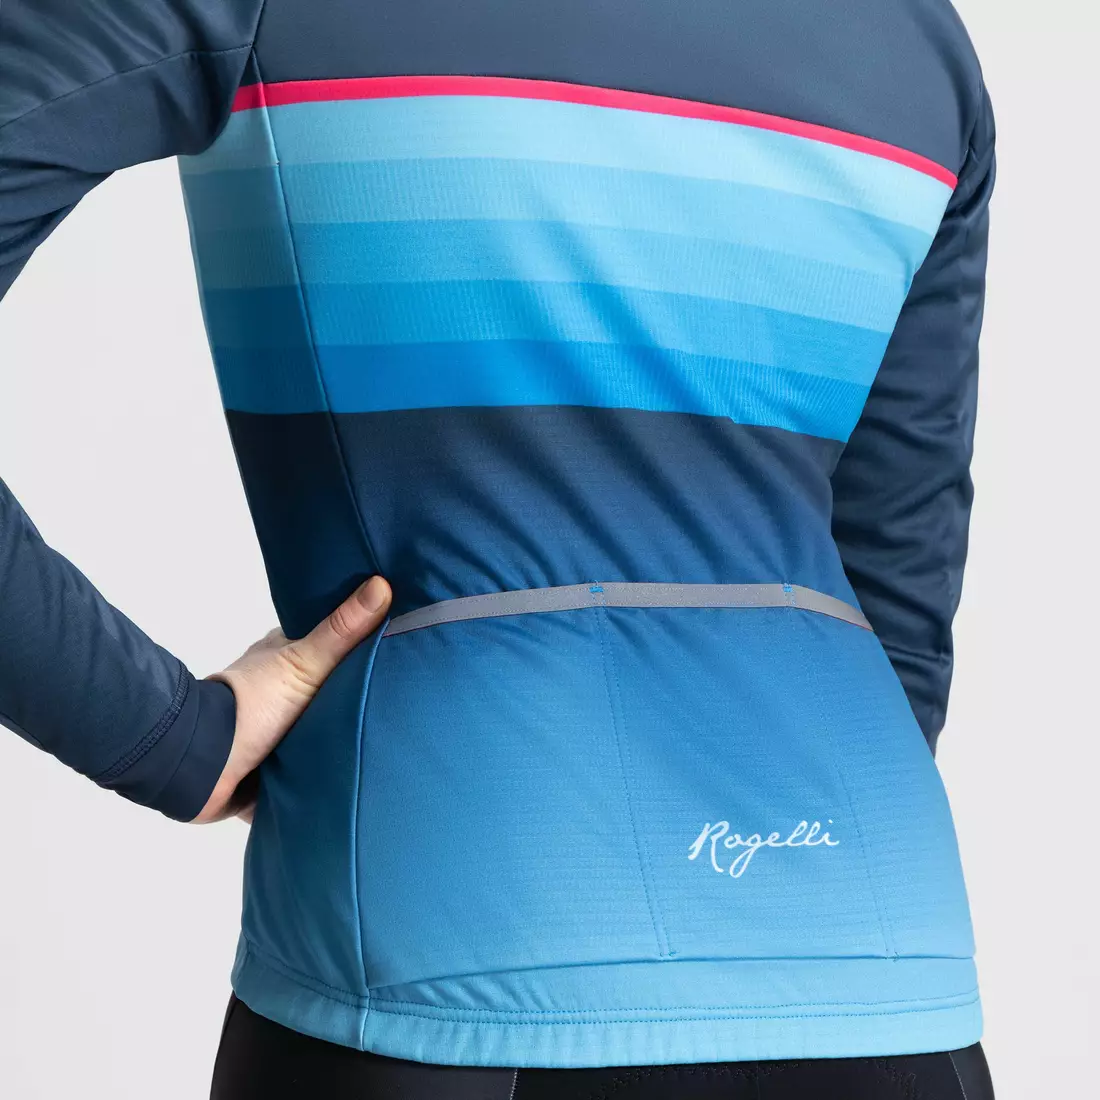 Rogelli women's winter cycling jacket made of membrane IMPRESS II, blue and pink